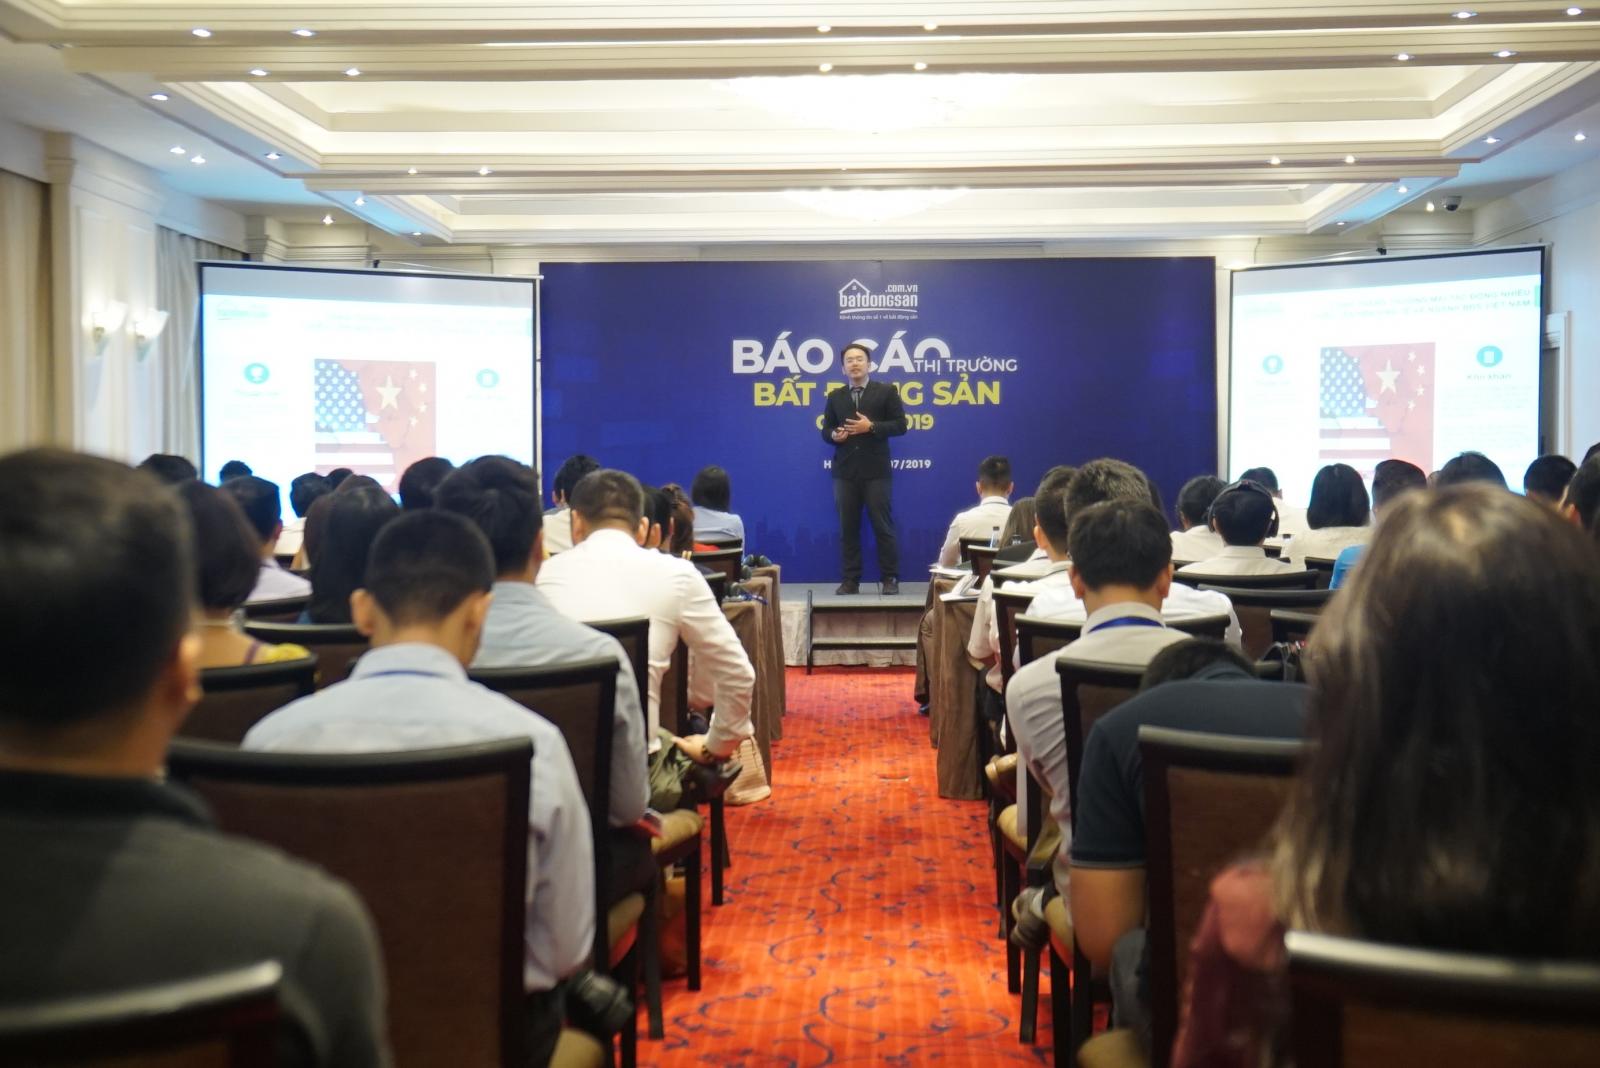 Mr. Nguyen Quoc Anh, Deputy Director of Batdongsan.com.vn, at the announcement event of our Real Estate Market Research Report Q2-2019.